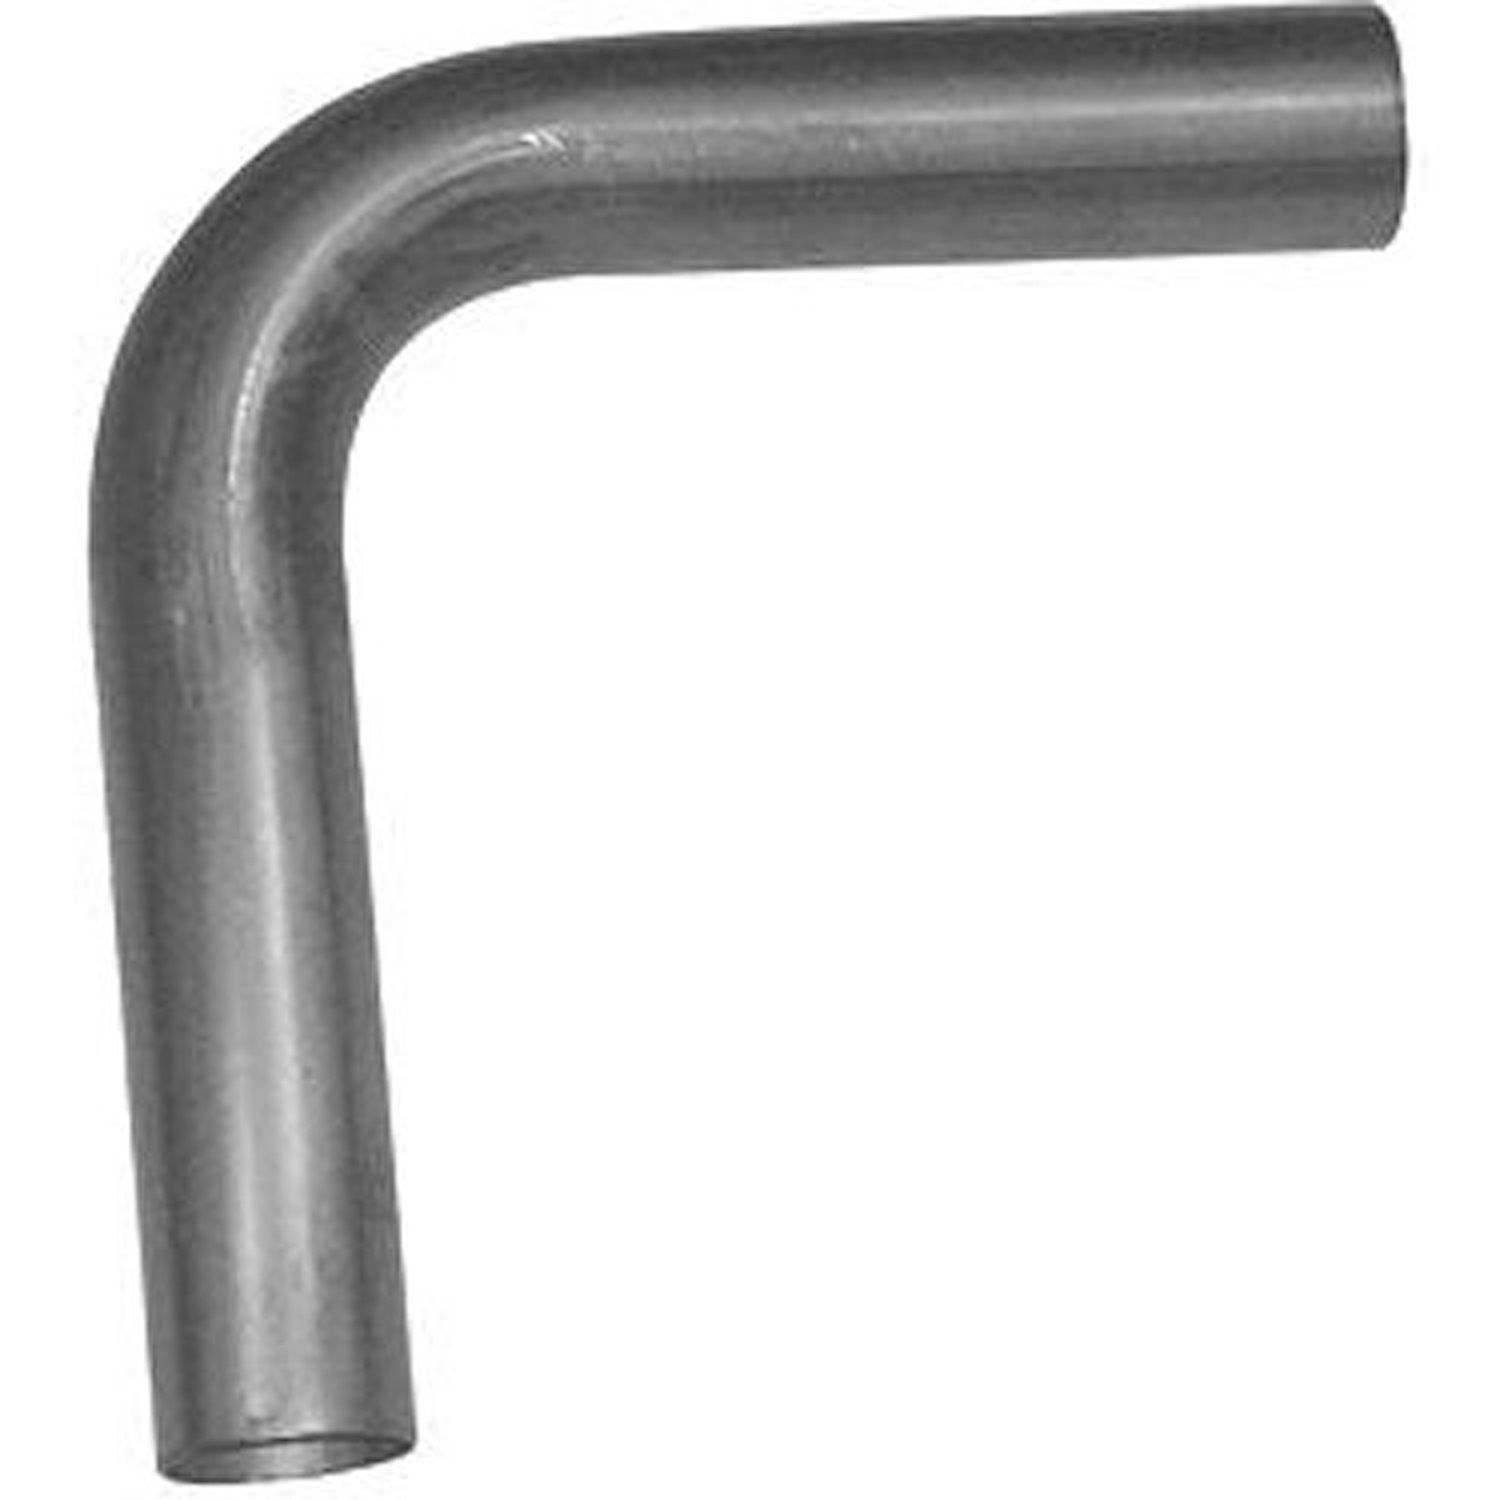 Stainless Steel 90° 2-1/4" Exhaust Bend